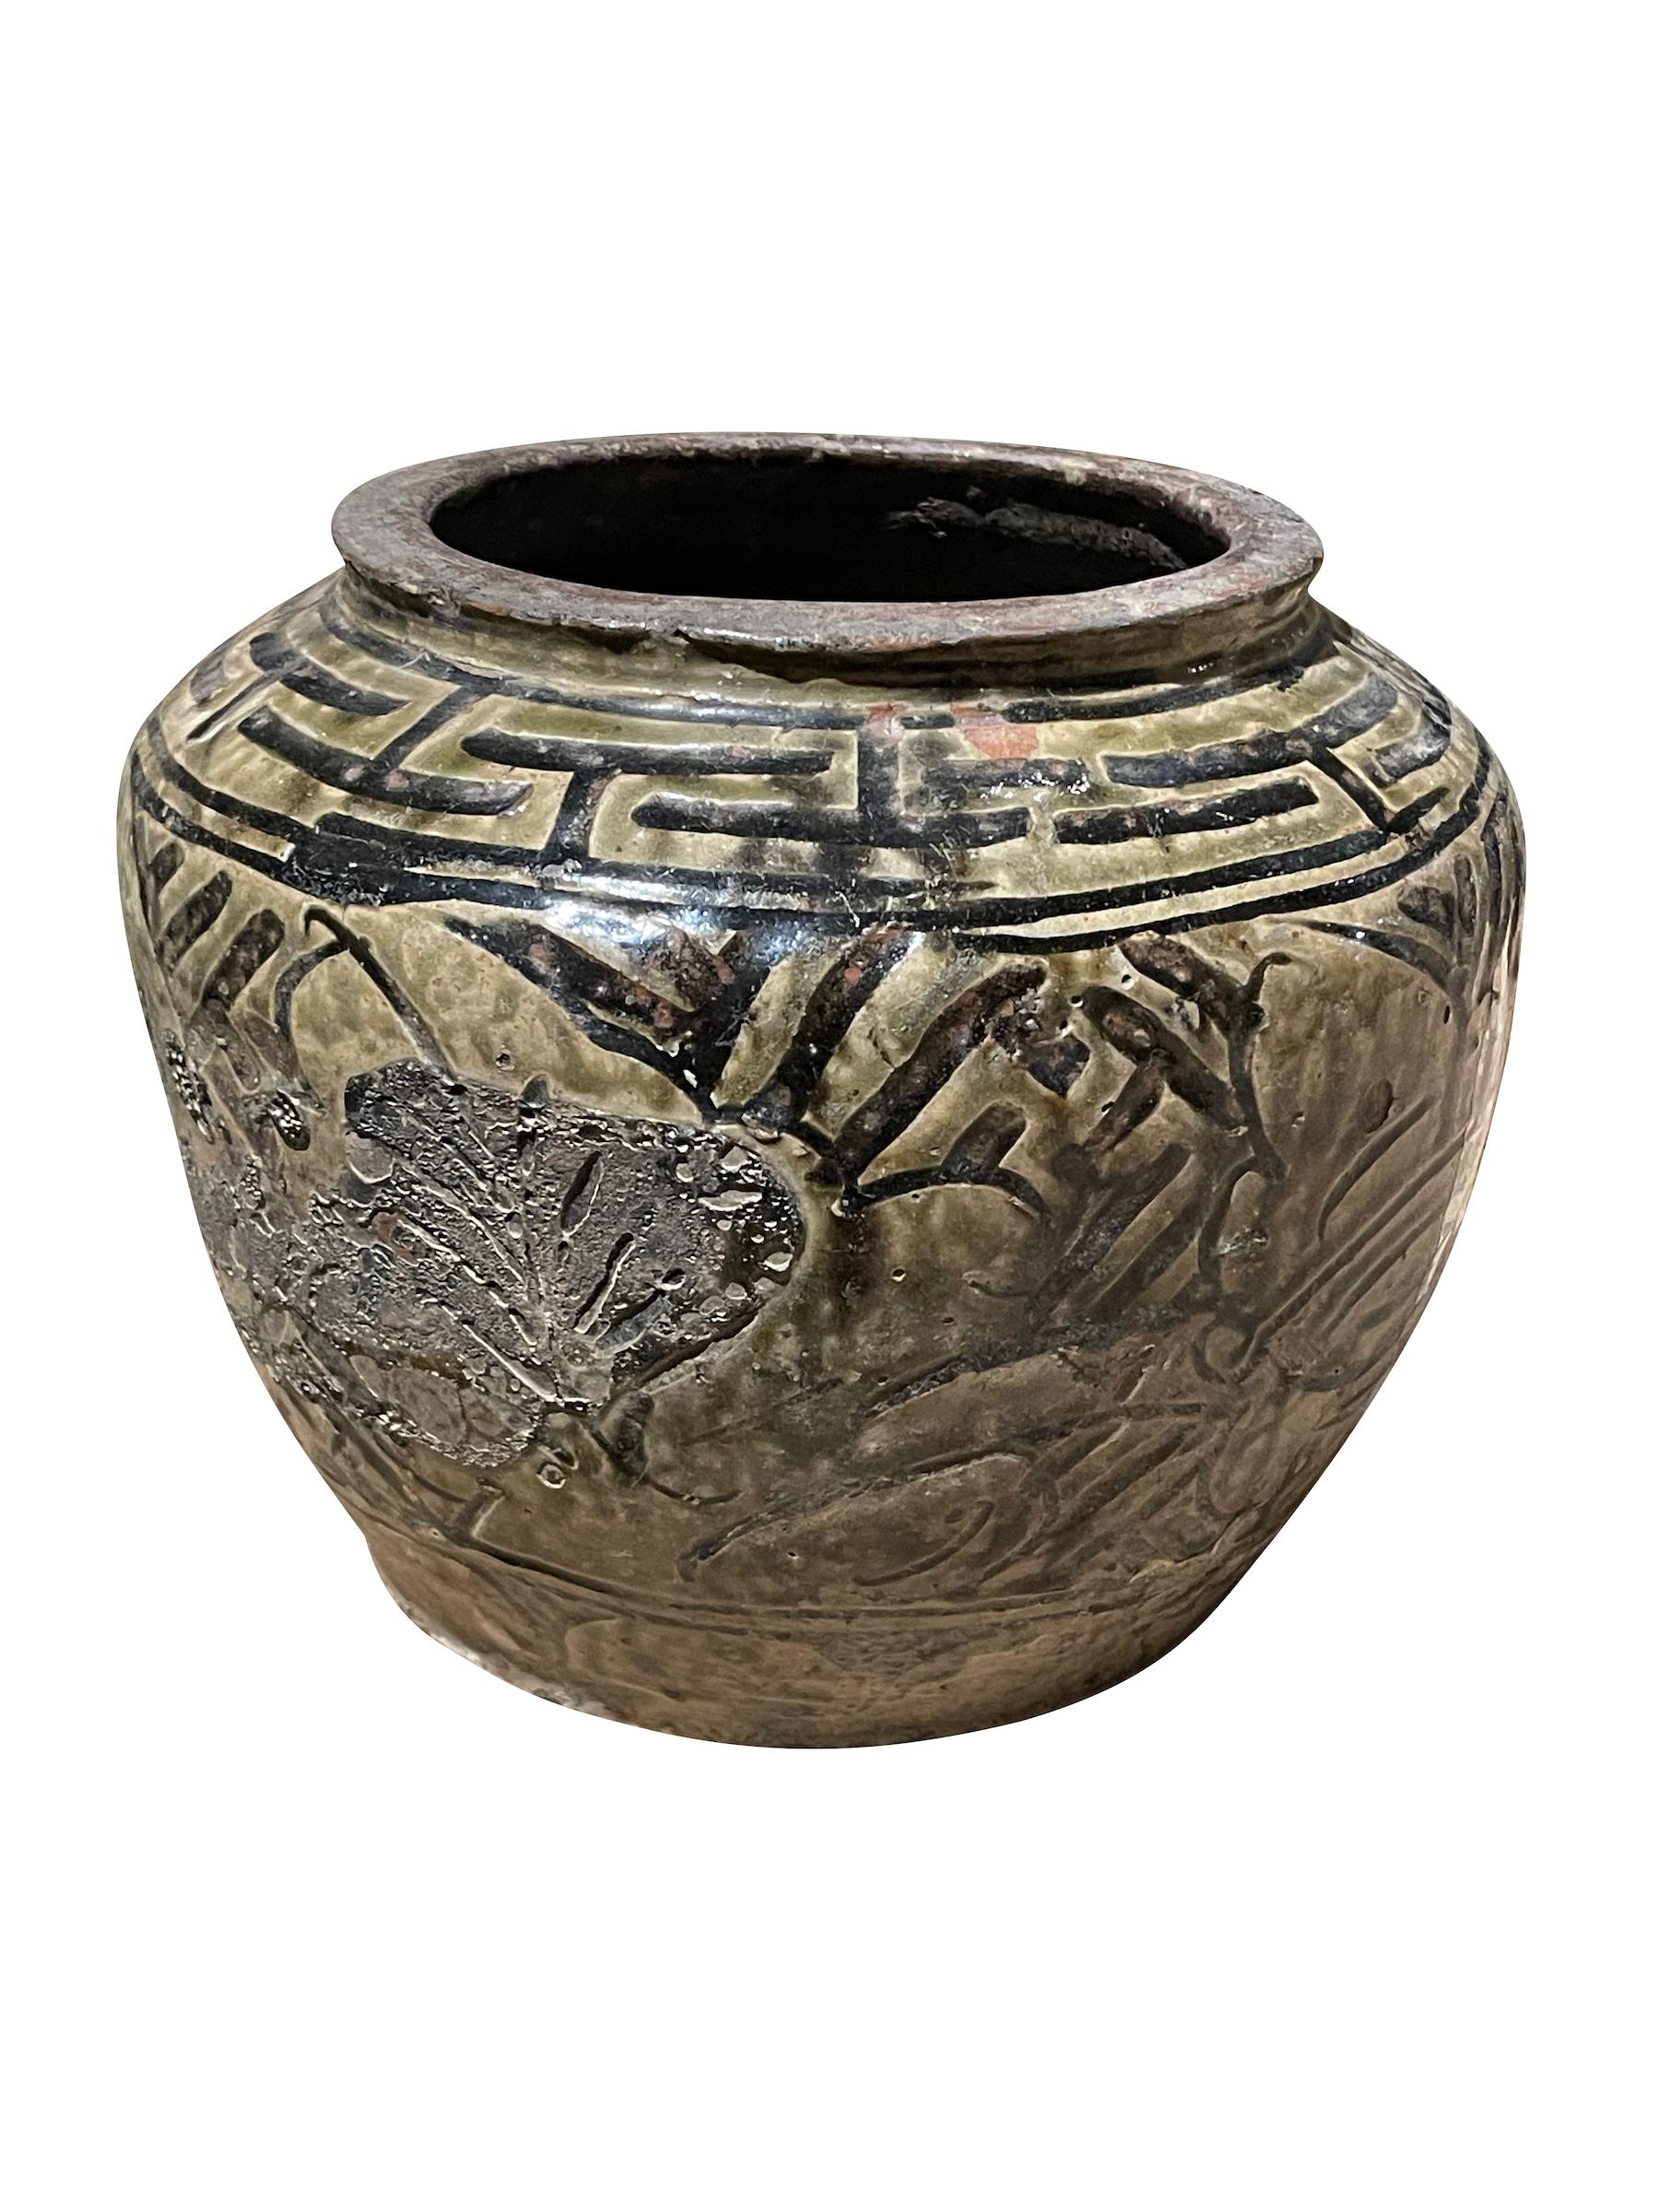 19th century Chinese classic shaped pot with traditional olive glaze.
Decorative geometric design along top of vase.
Natural weathered patina and age.
Part of a large collection
ARRIVING APRIL